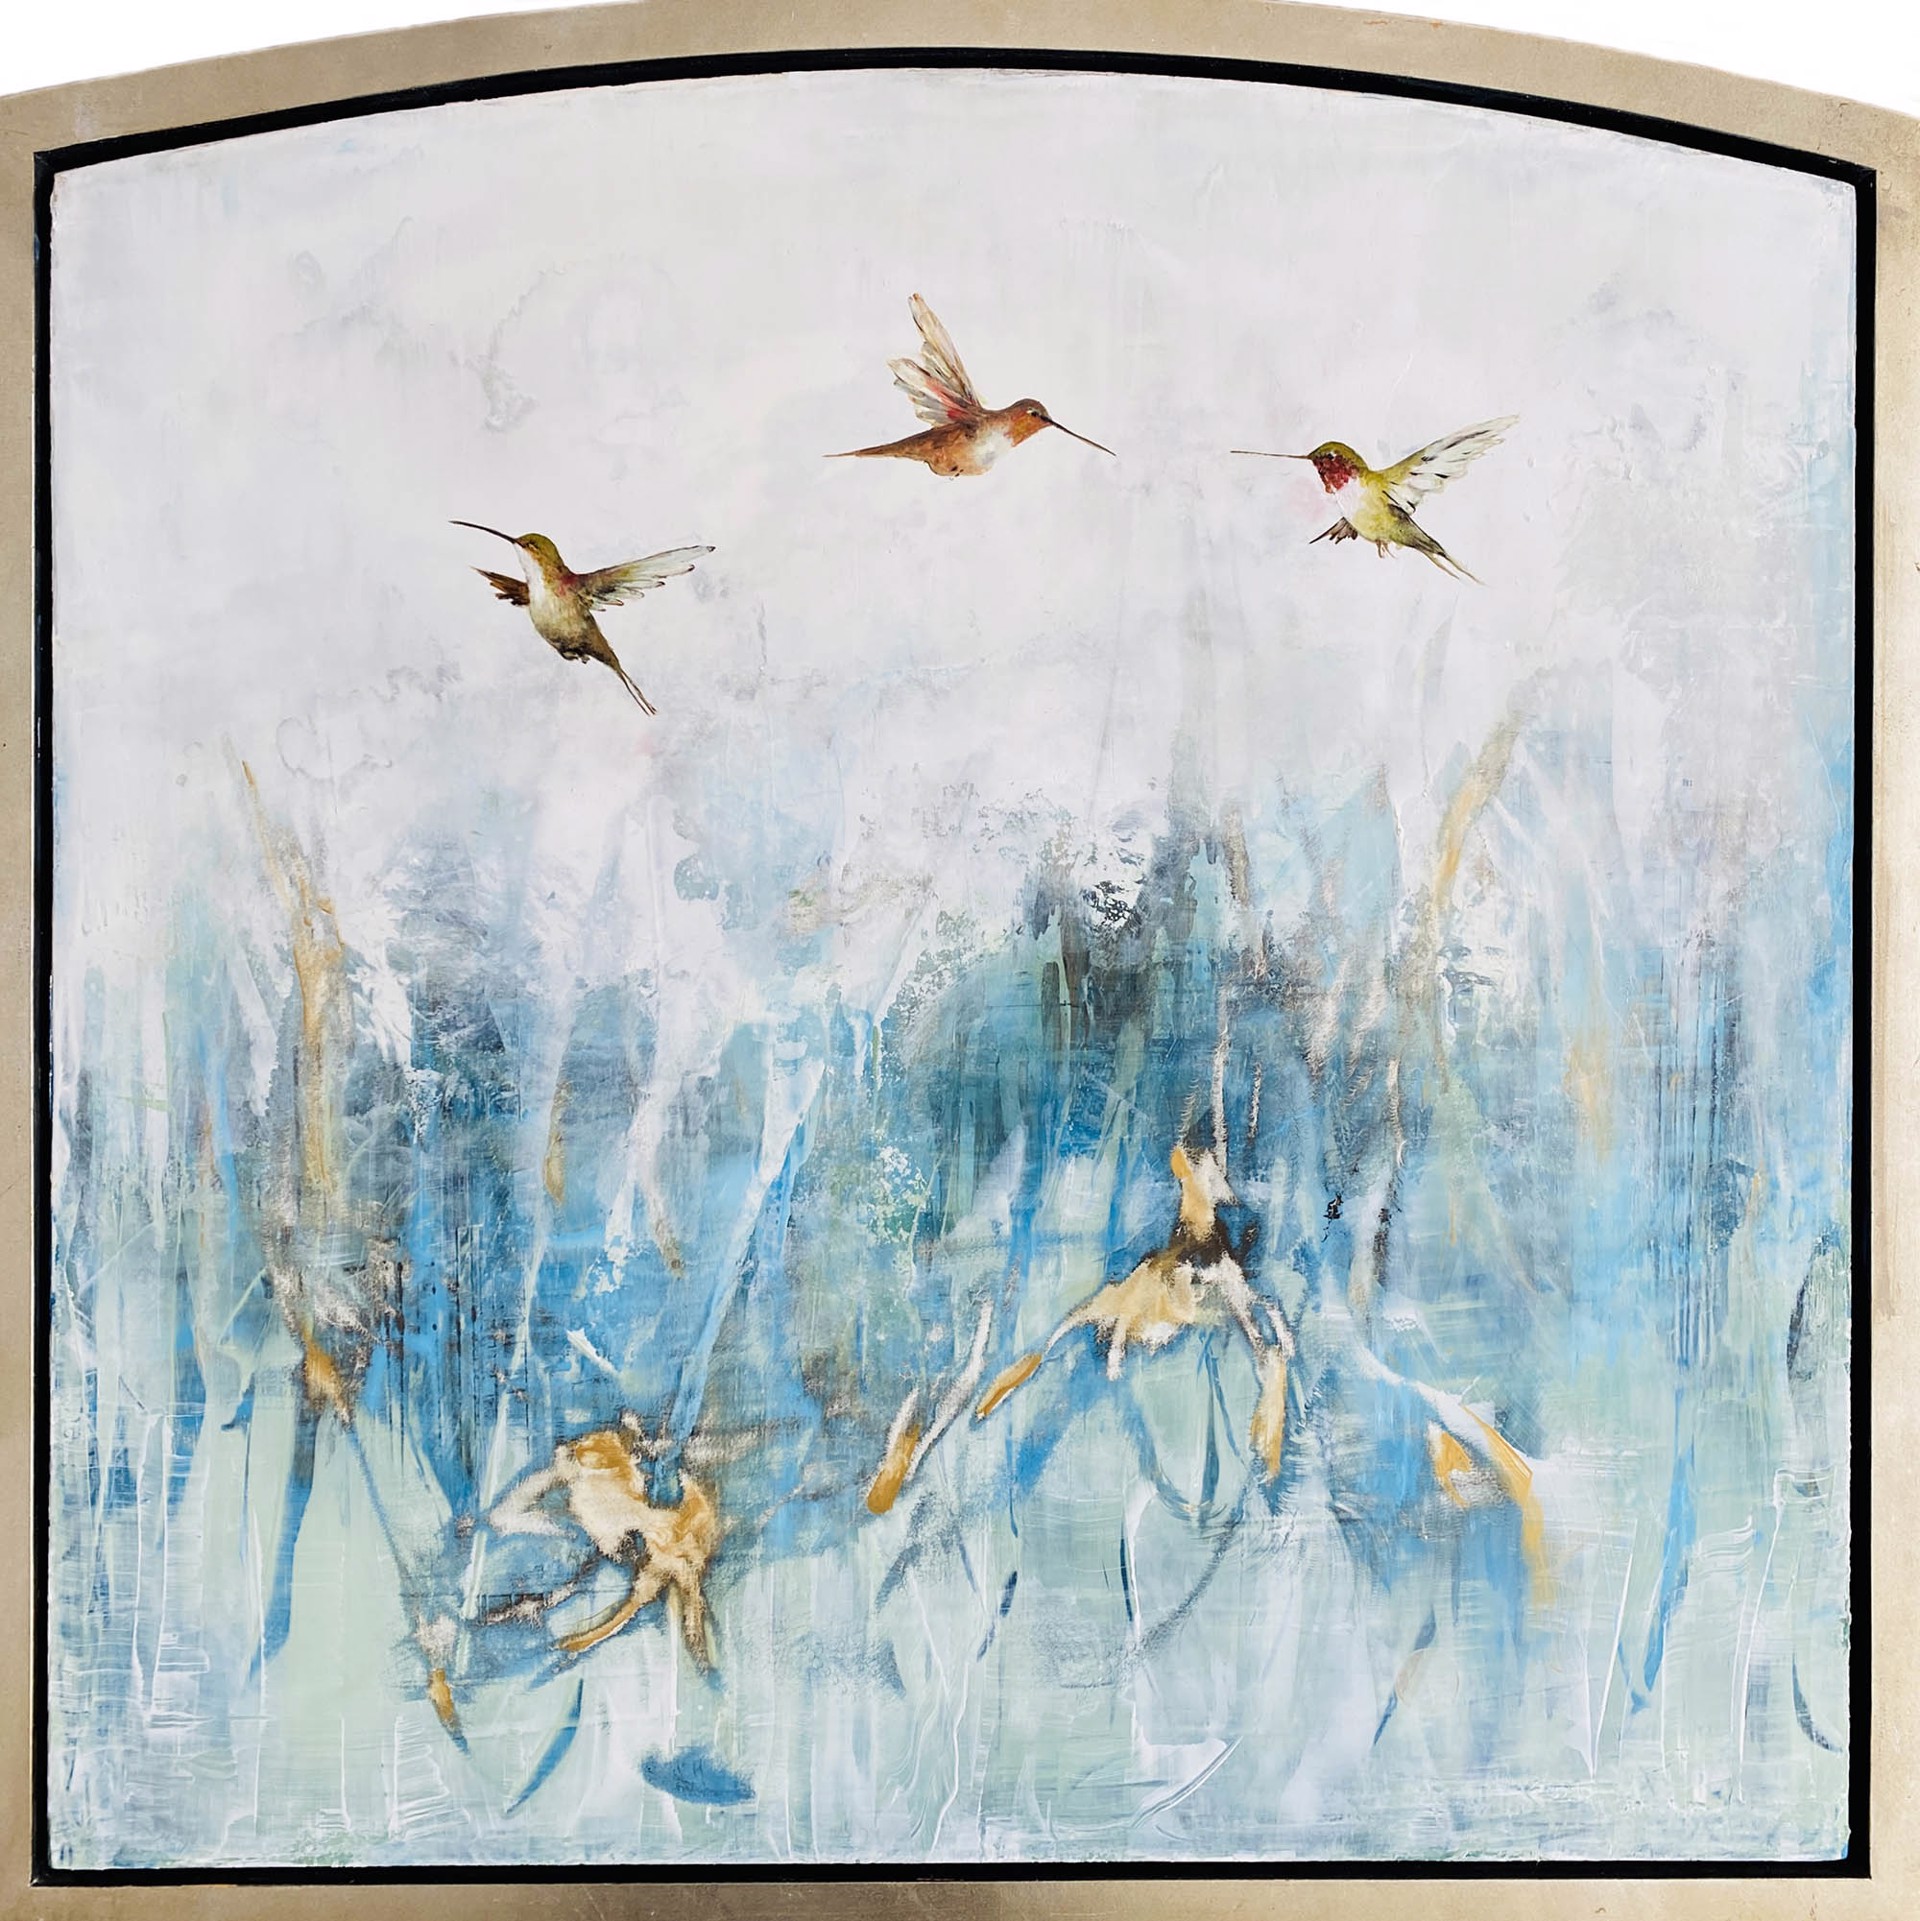 Original Oil Painting Featuring Three Hummingbirds Flying Over Blue Abstract Background With Geometric Details In Arched Frame